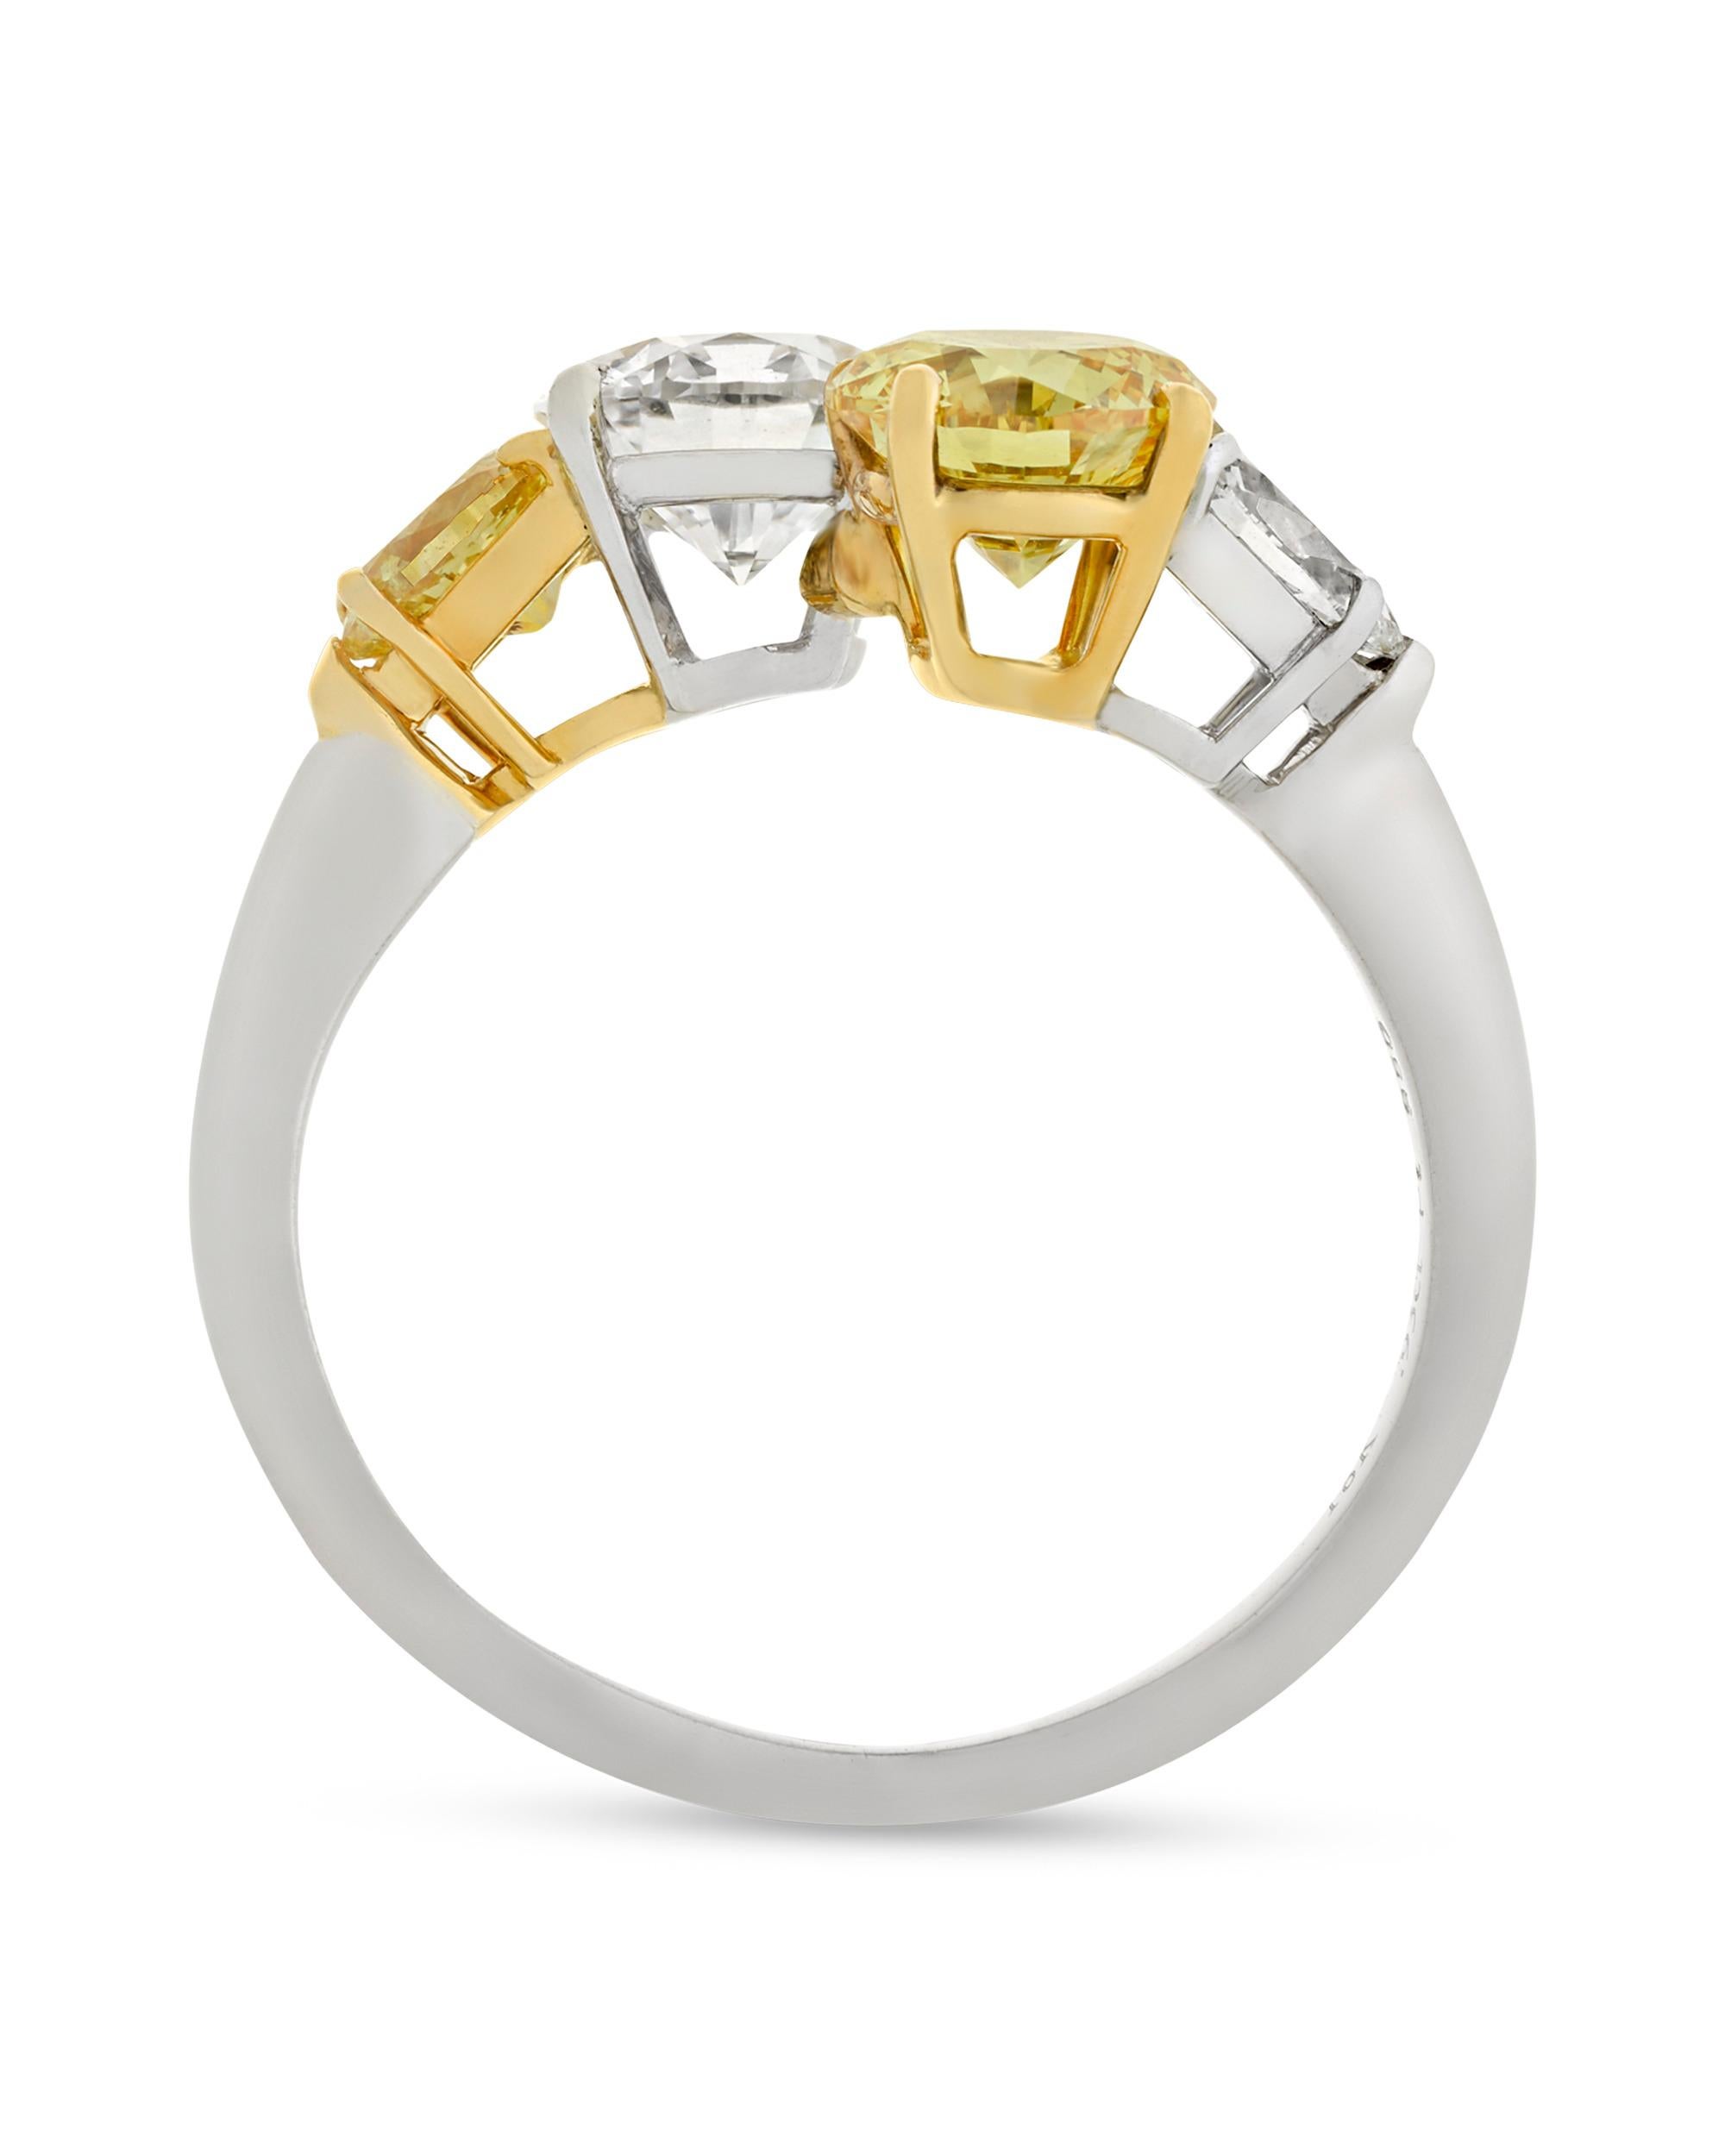 A rare internally flawless white diamond intersects with a natural fancy vivid yellow diamond in this classic bypass ring. Both stones are certified by the Gemological Institute of America (GIA): the 1.01-carat white diamond is classified to be